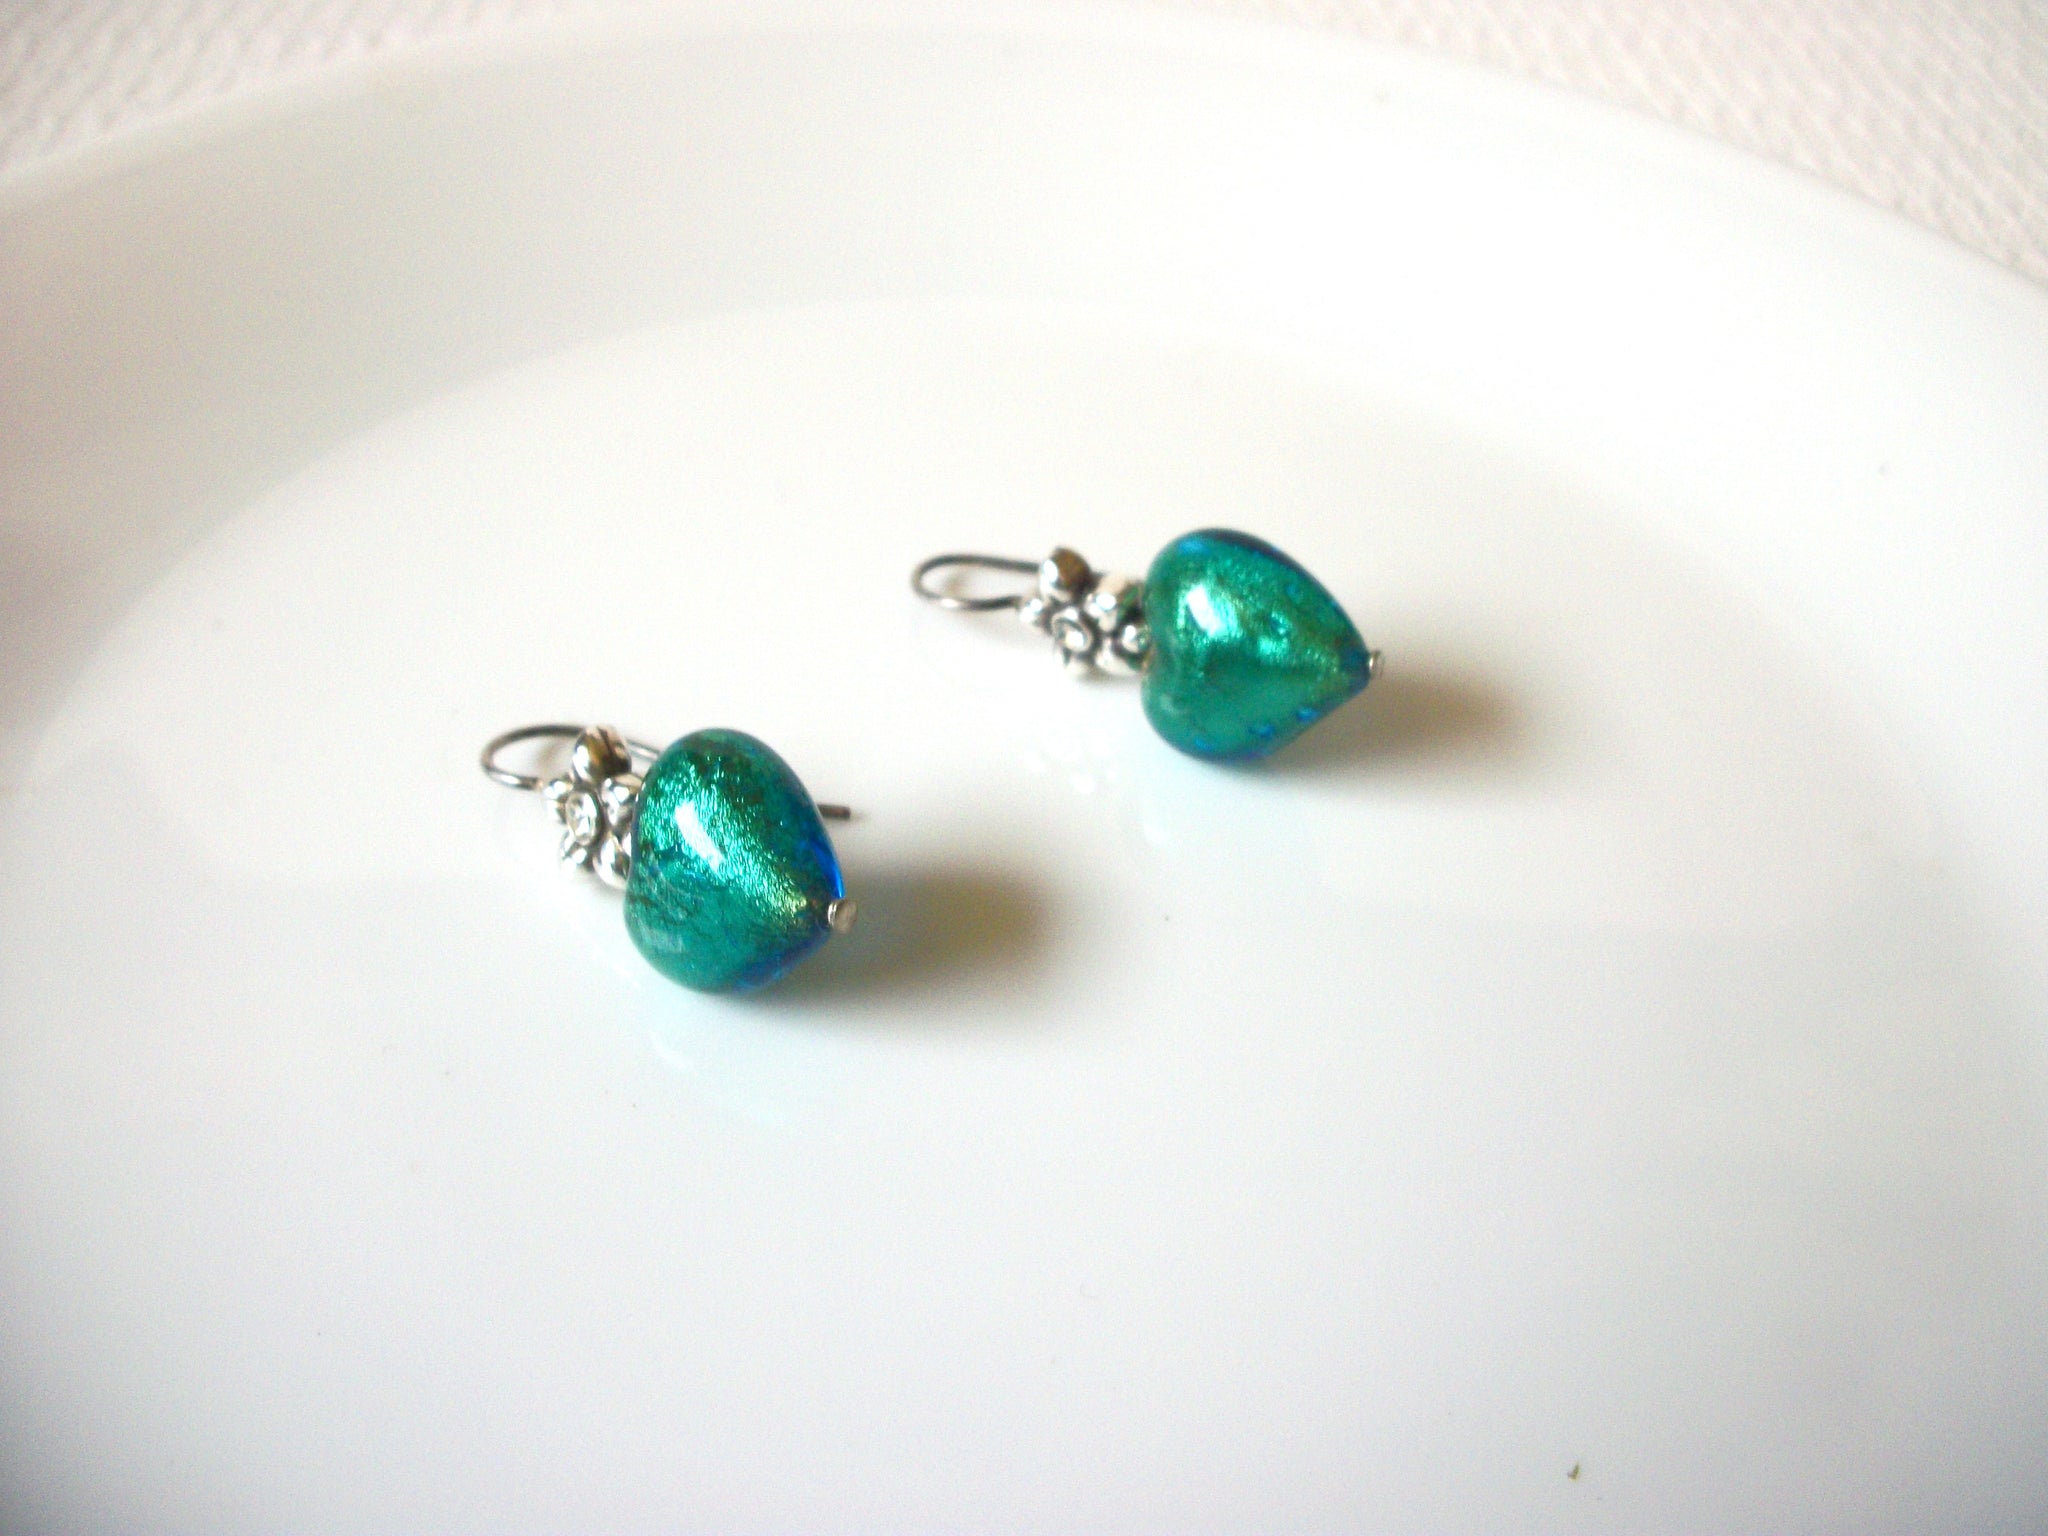 Vintage Turquoise Green Glass Earrings 80320